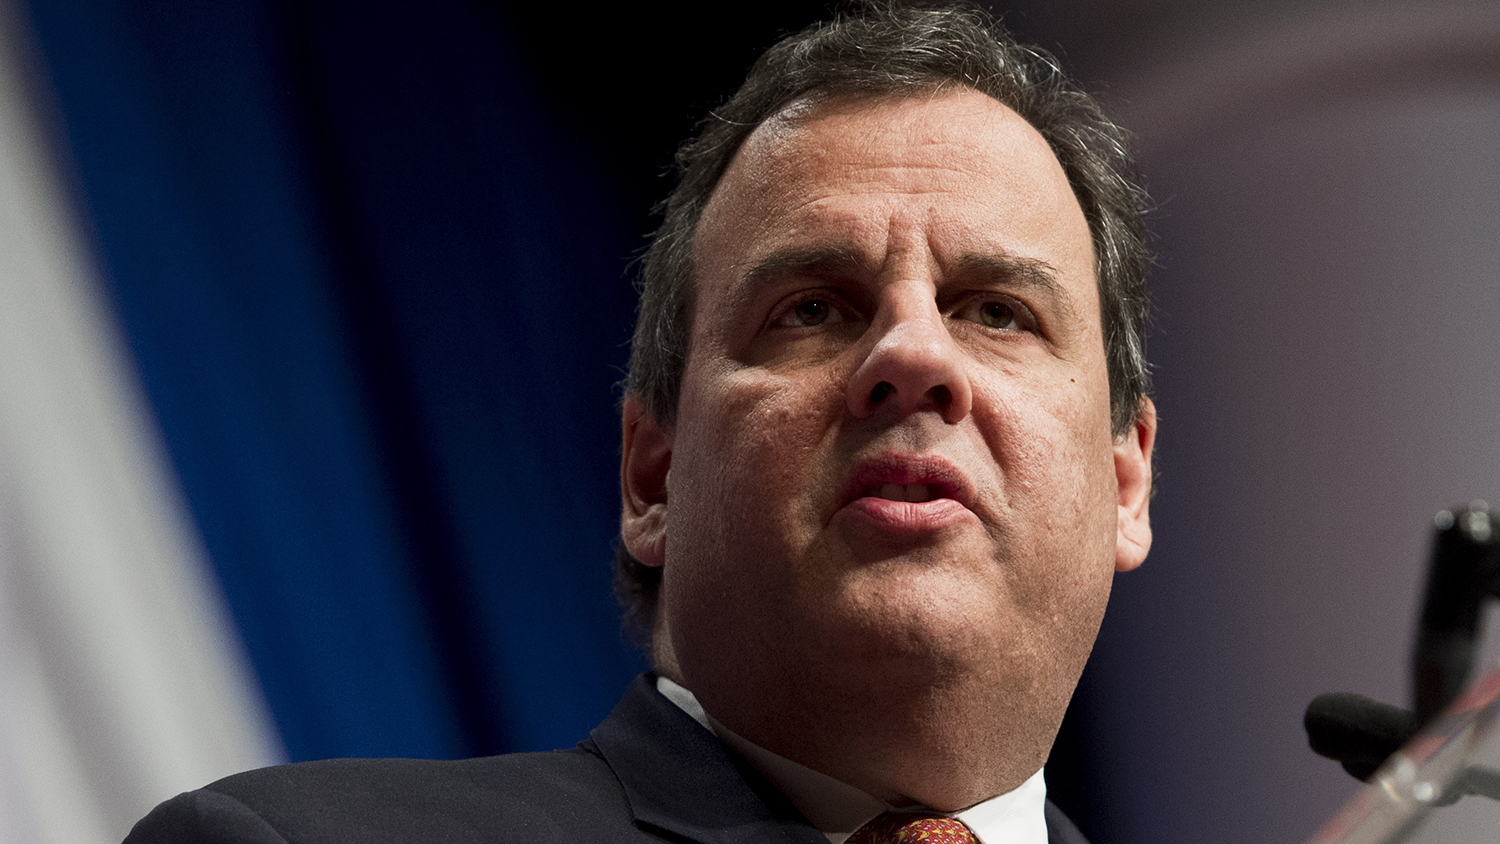 Governor Chris Christie of New Jersey speaks in Washington on Dec. 3, 2015.
